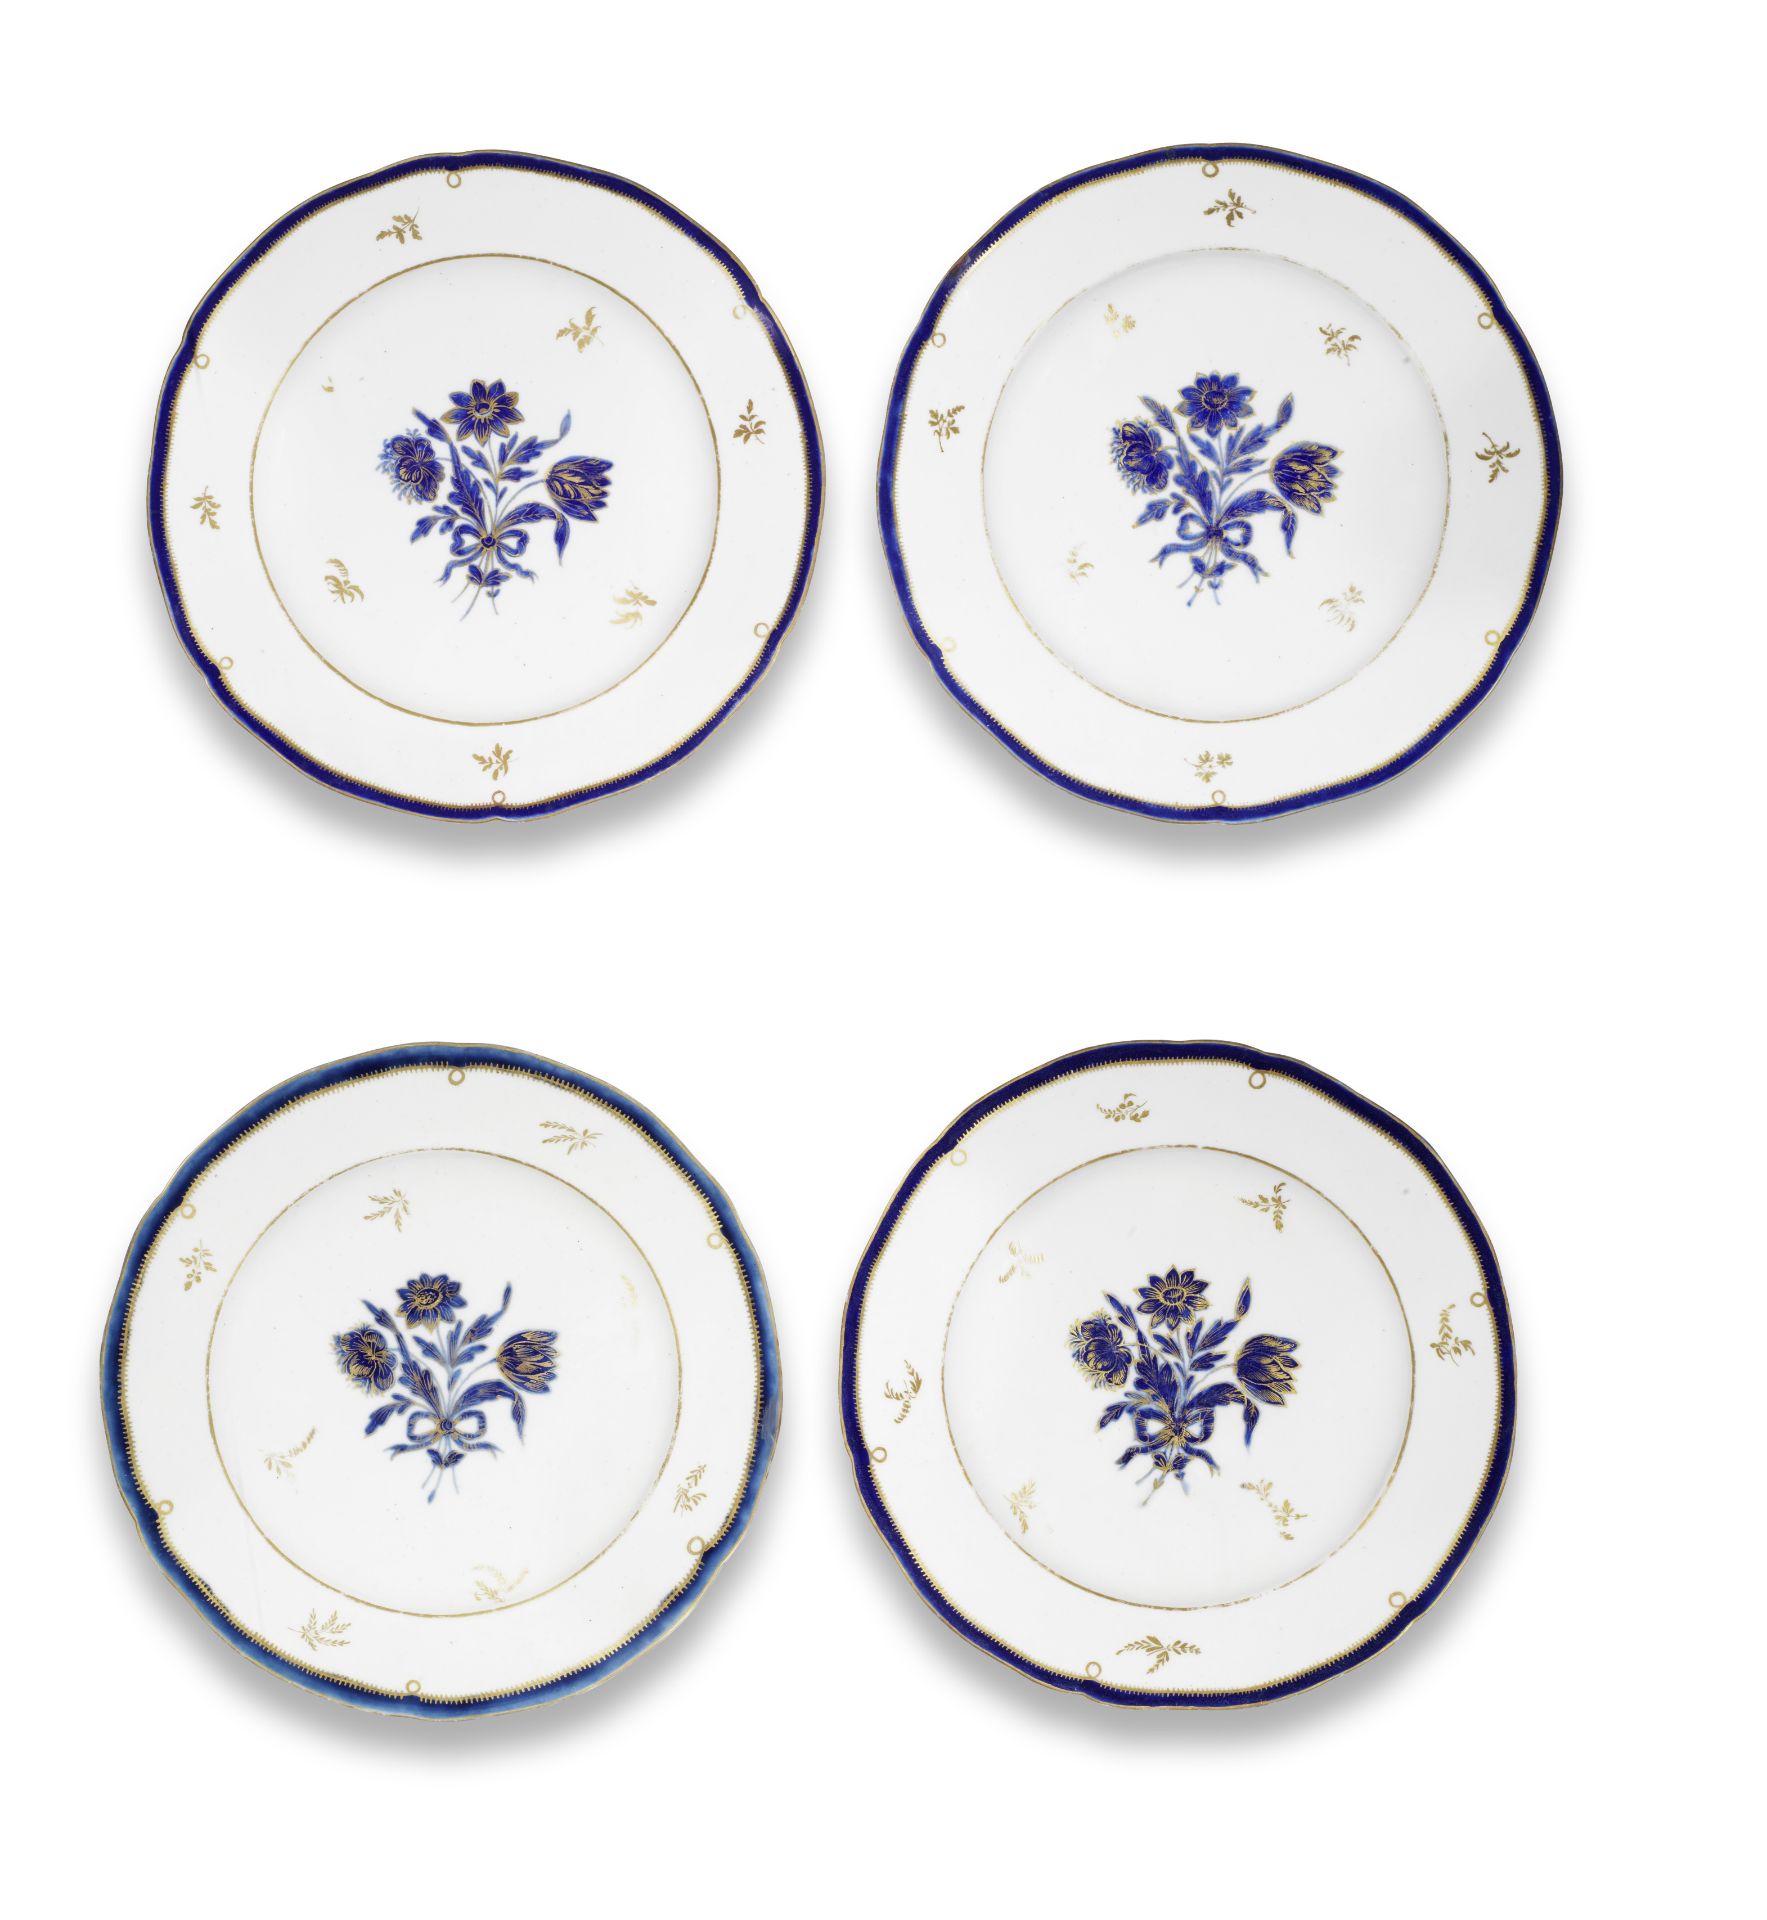 A set of four Cozzi plates, late 18th century